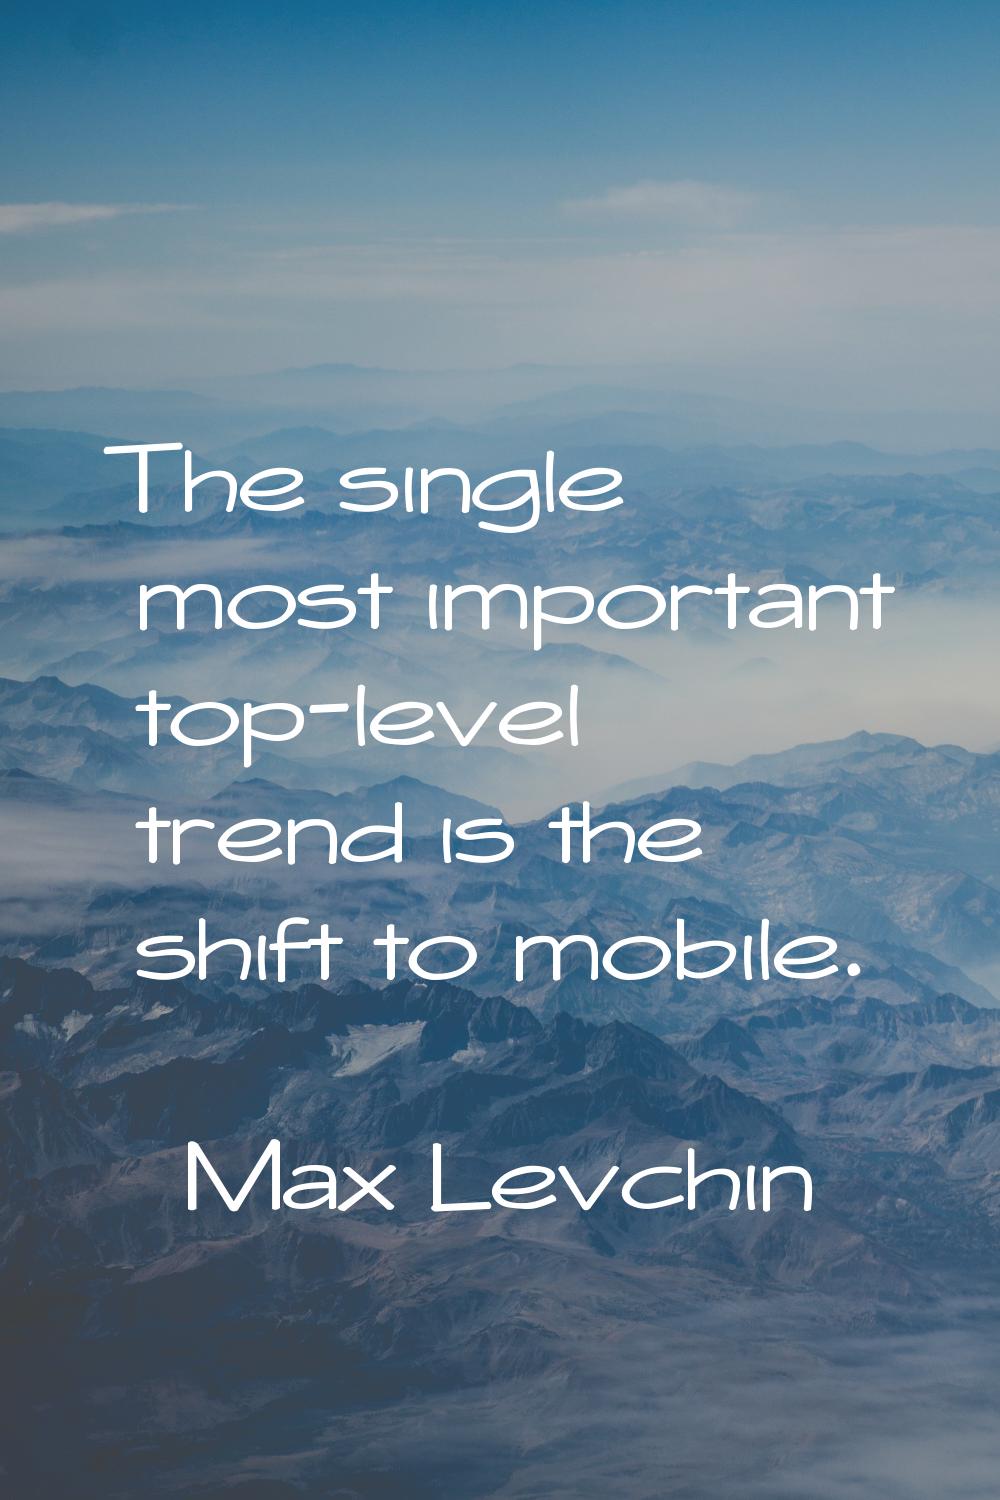 The single most important top-level trend is the shift to mobile.